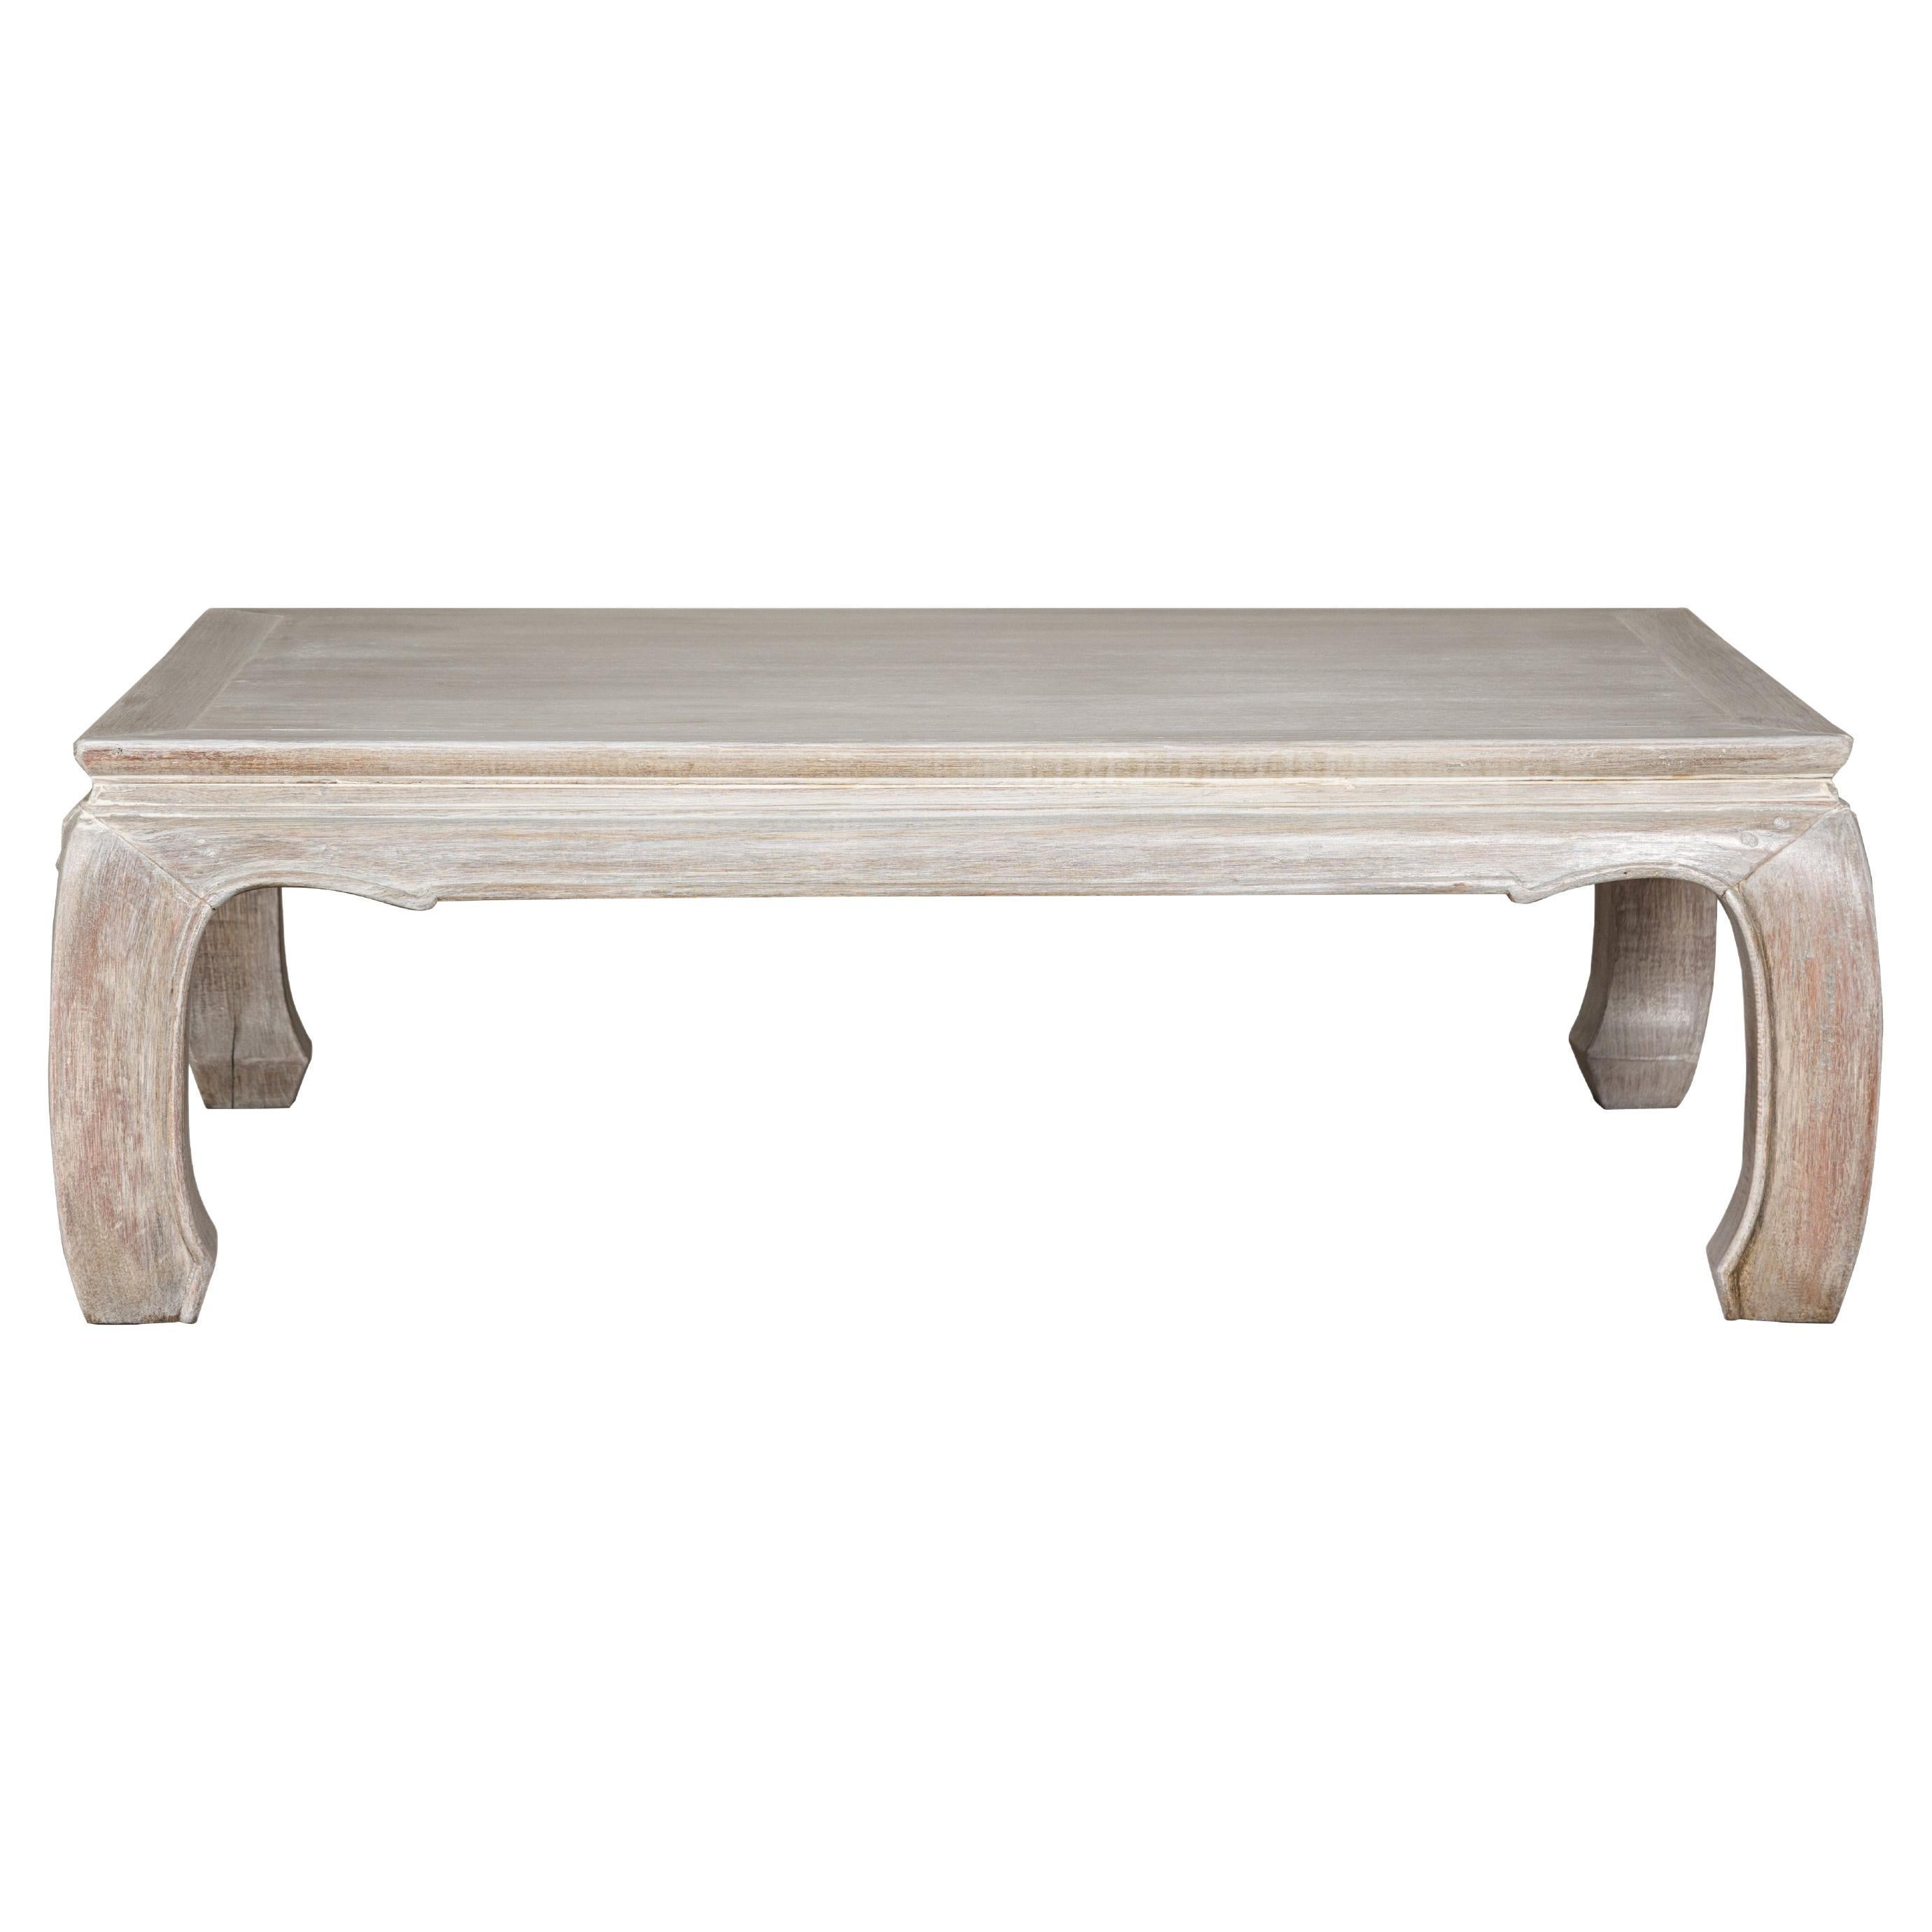 Teak Ming Style Whitewash Coffee Table with Chow Legs and Carved Apron